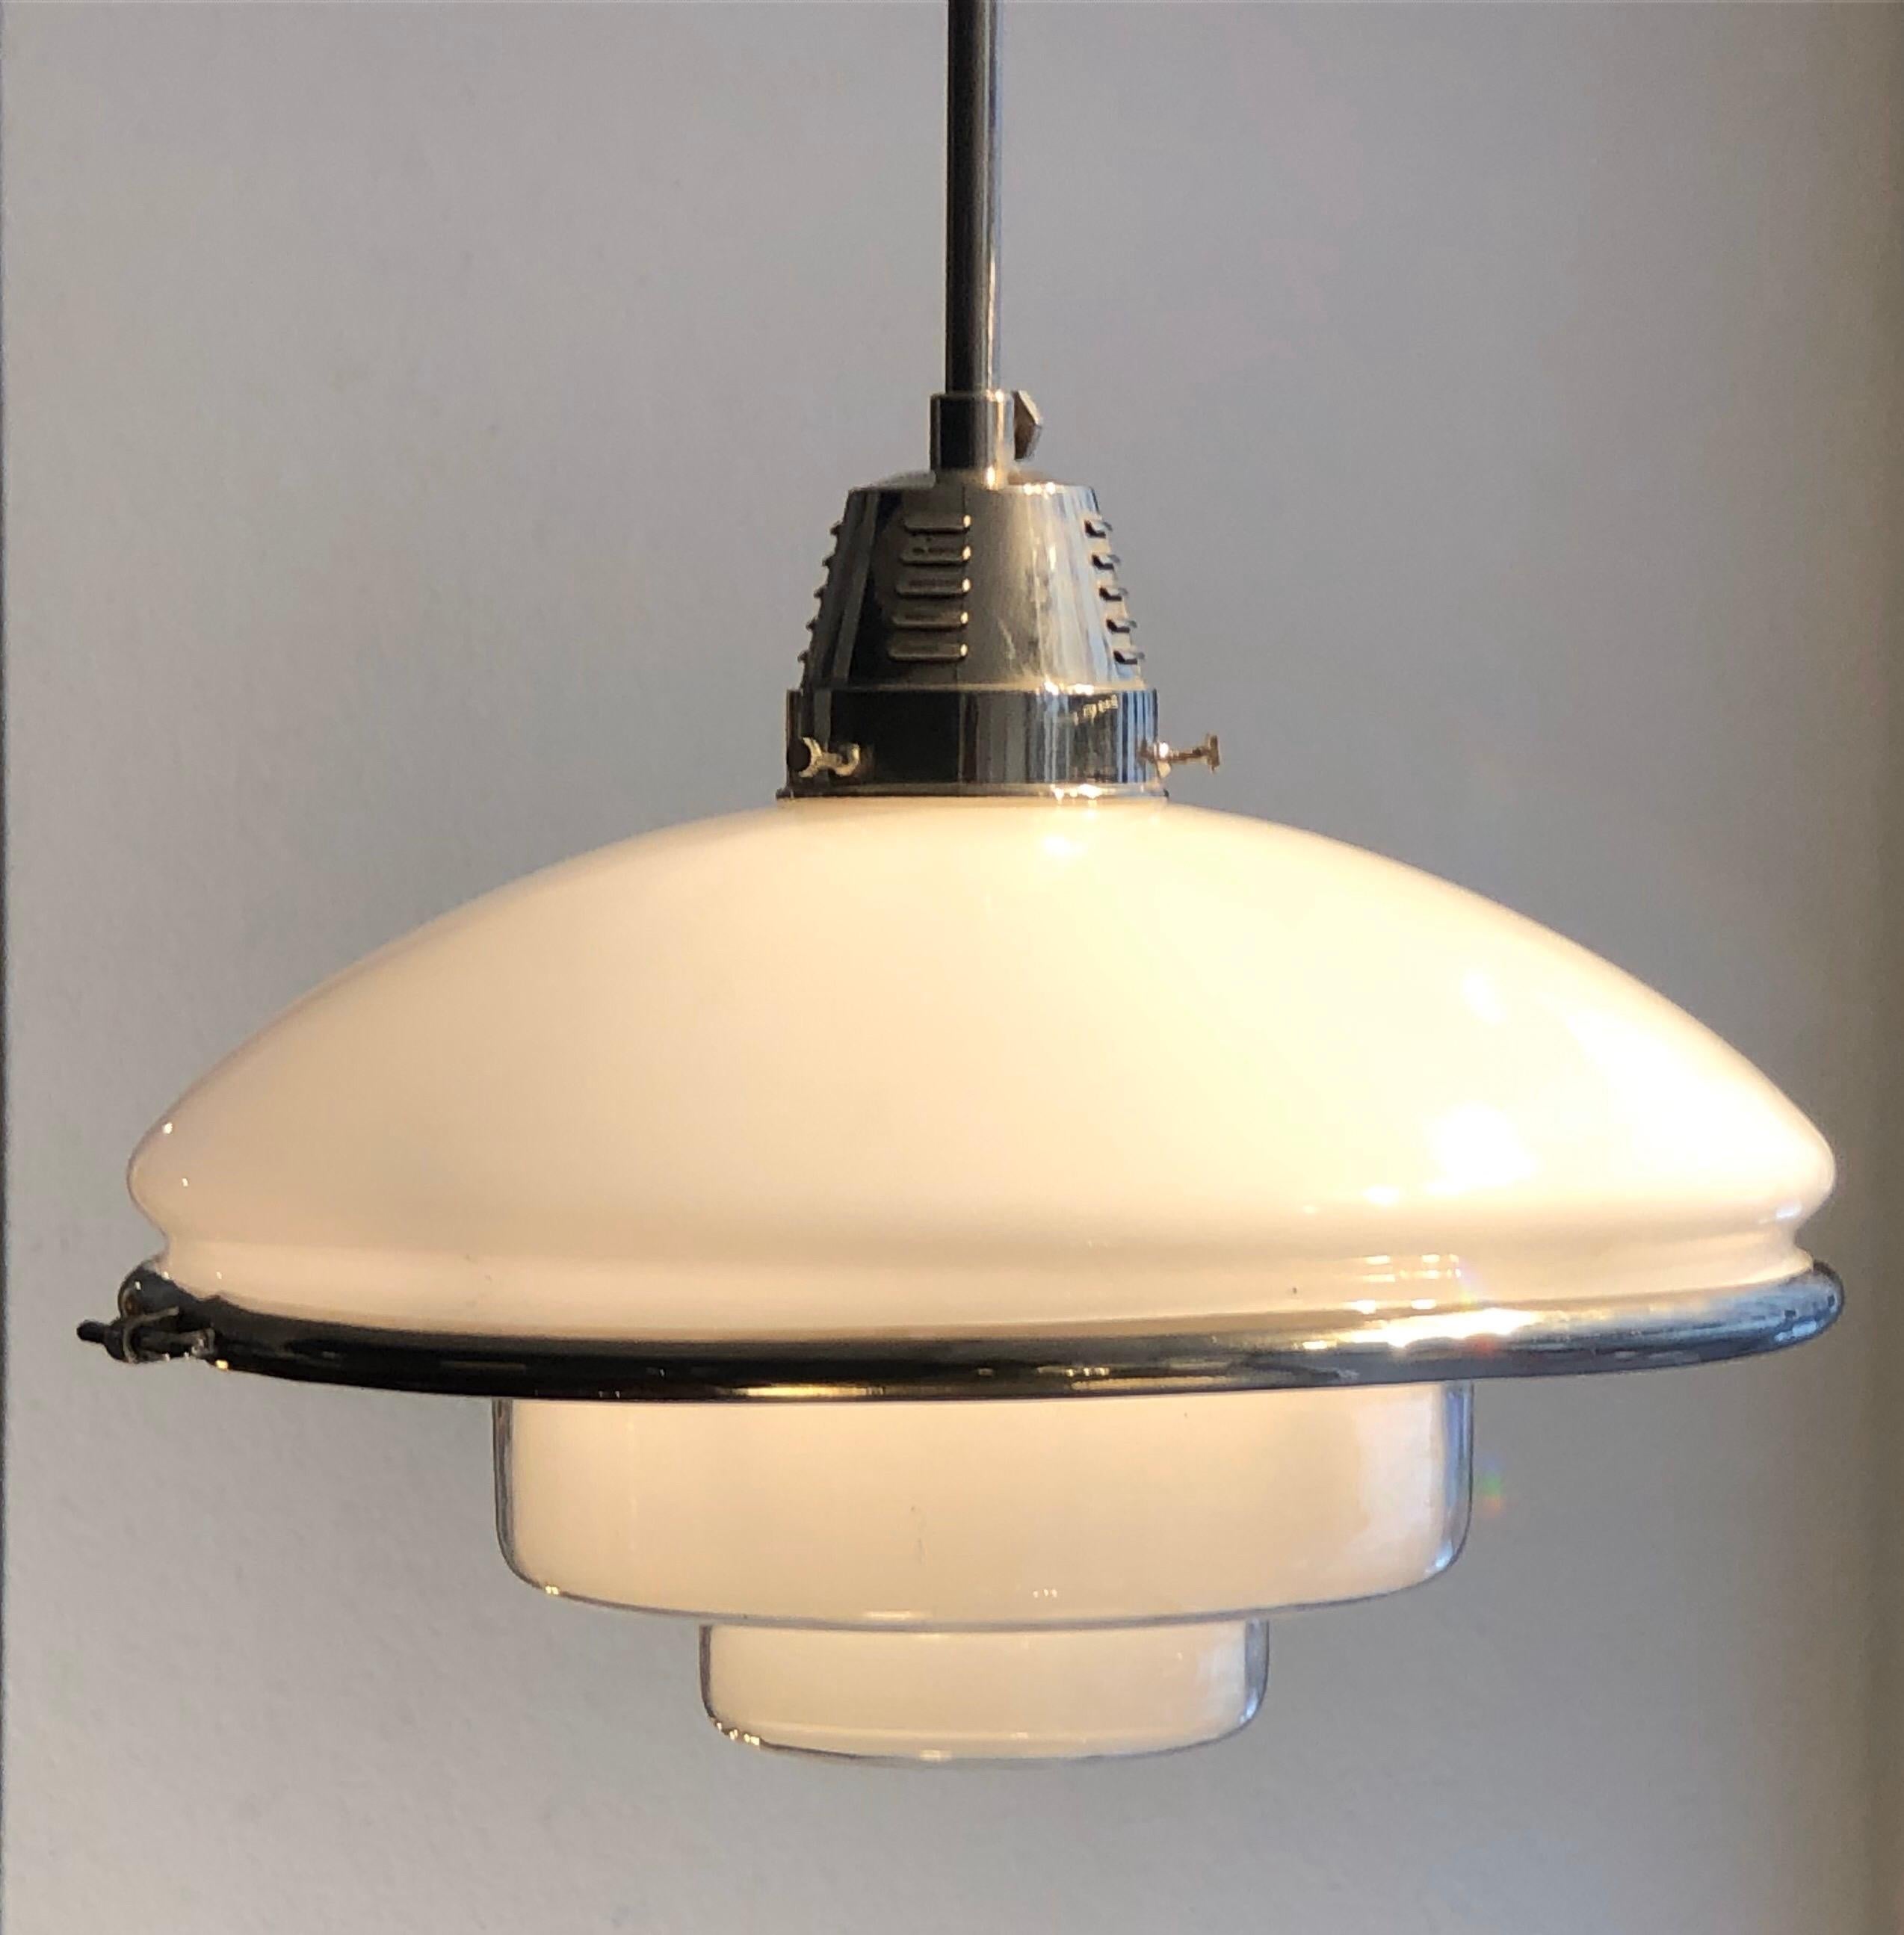 Plated German Bauhaus Design Sistrah Pendant Lamp by Otto Müller, 1931 For Sale